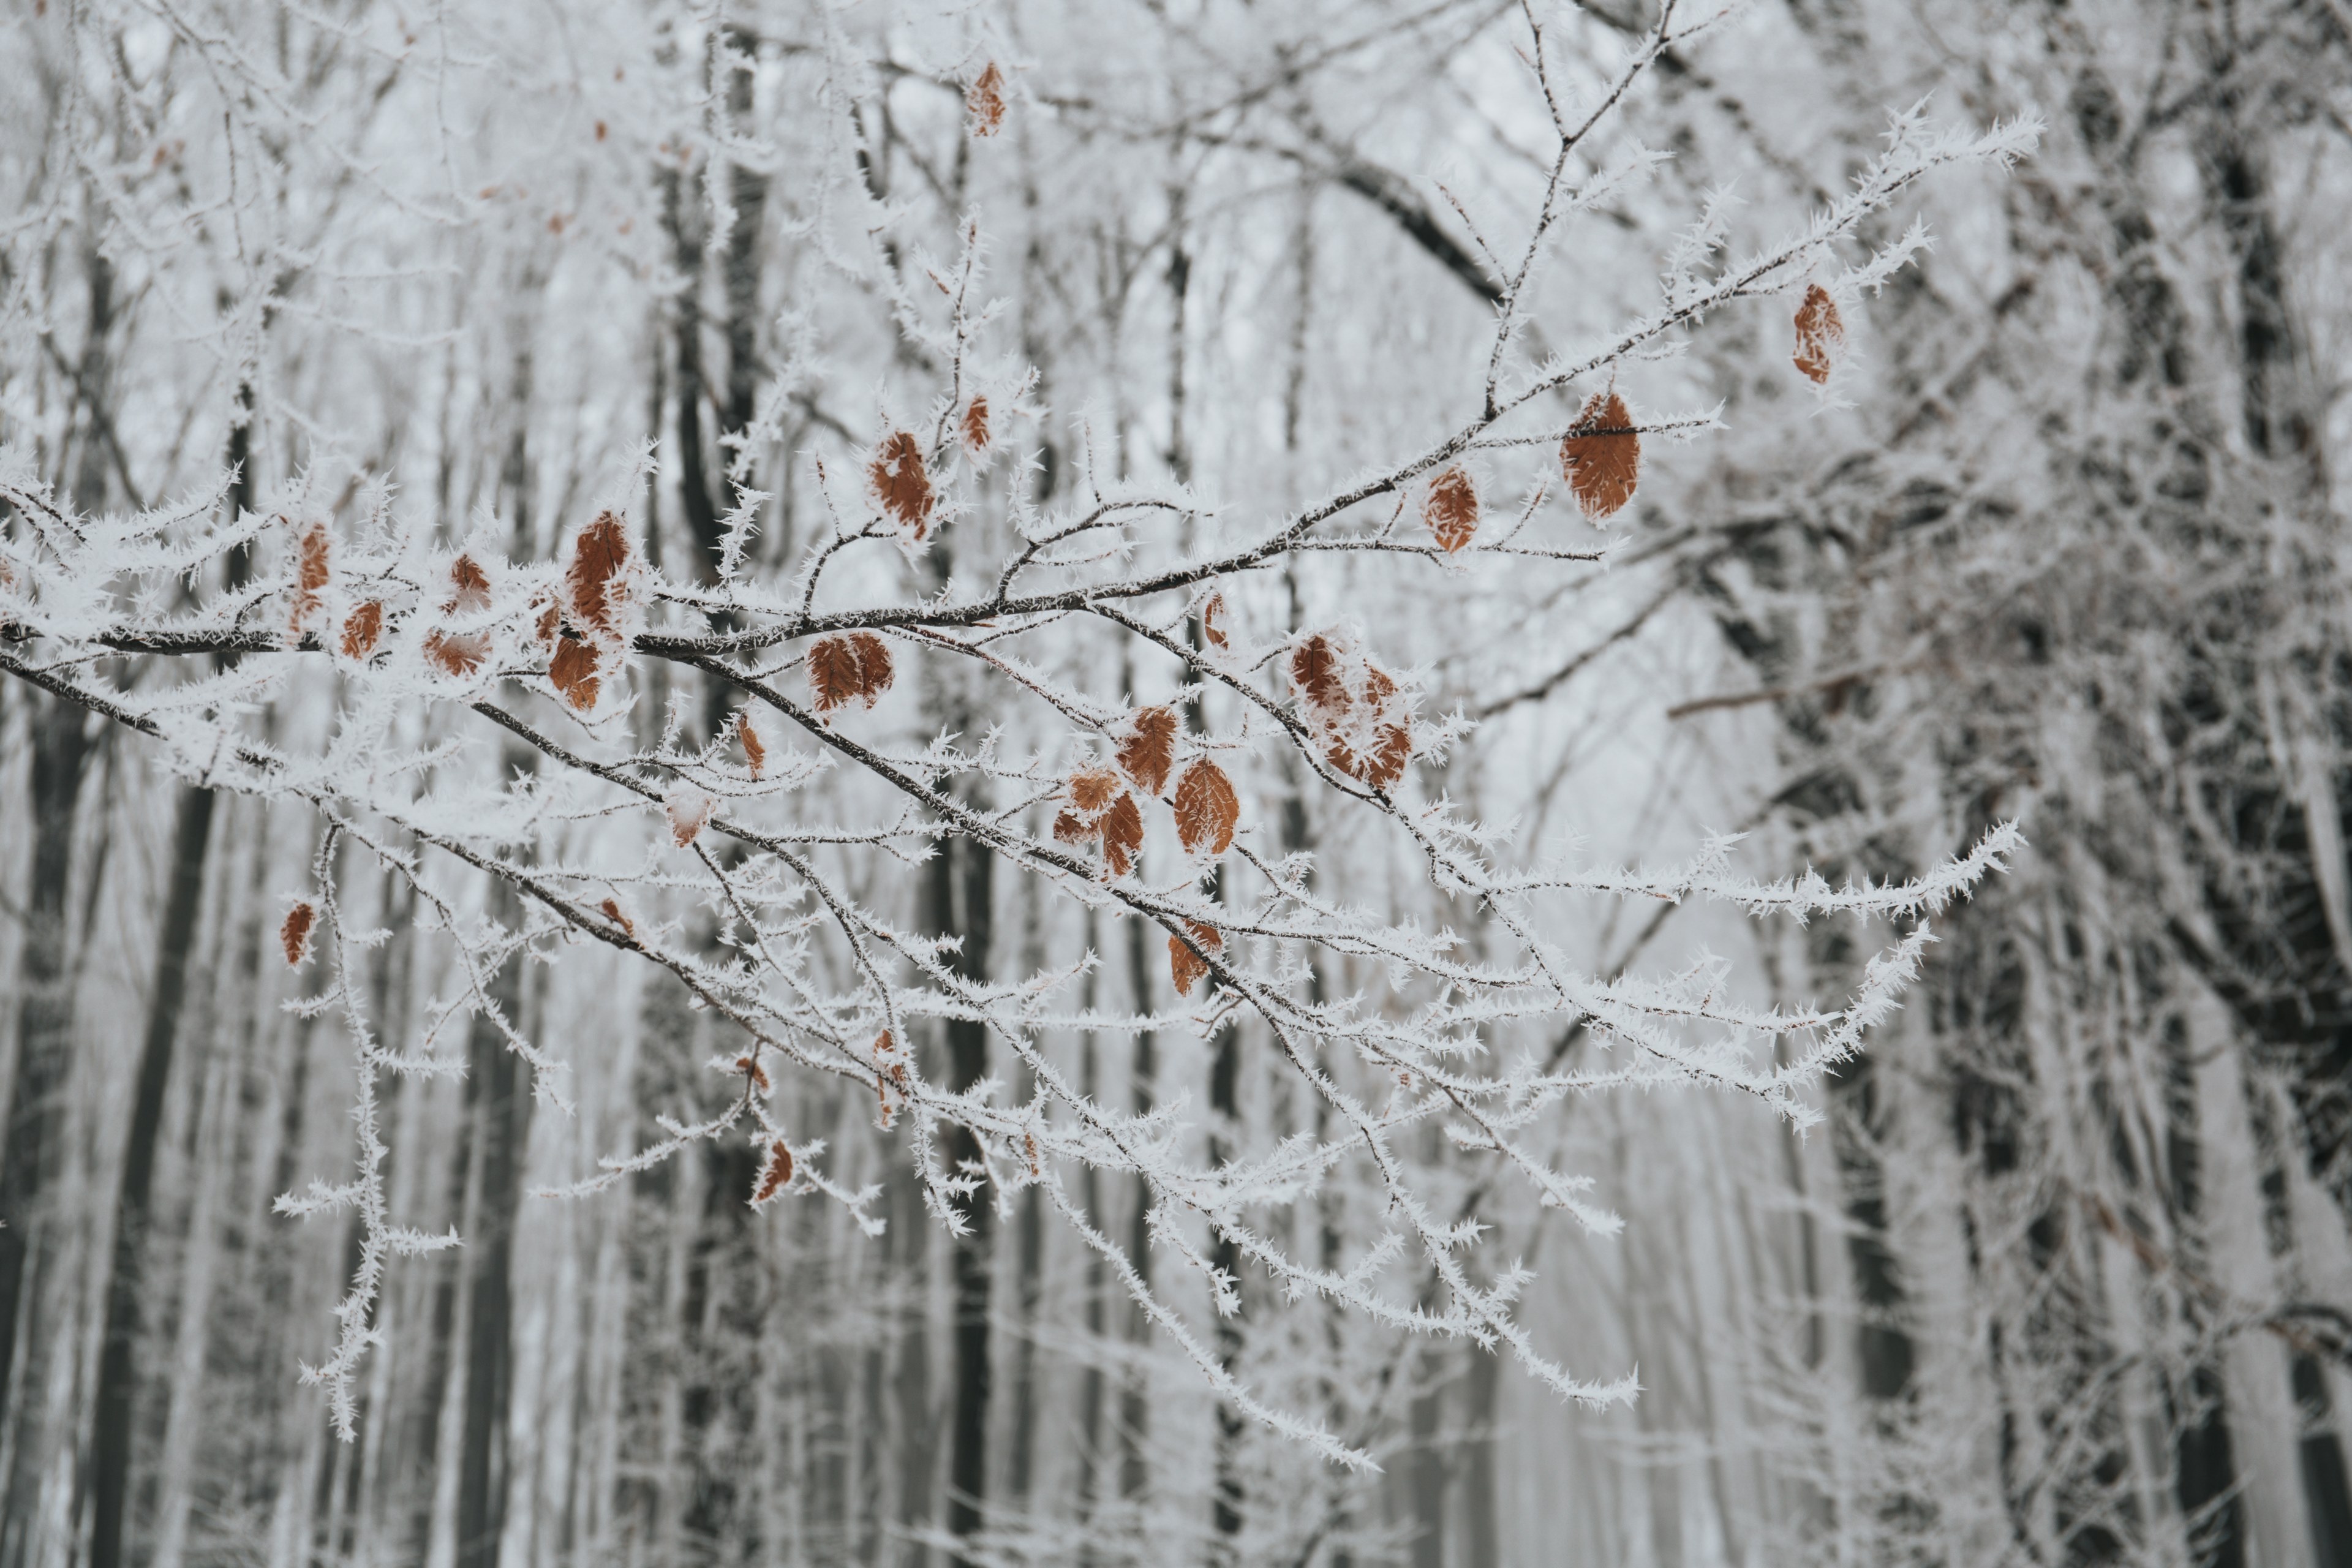 Wallpapers ID: 230791 / a few brown leaves hang on the branches of trees covered in winter frost, frosted leaves on trees 4k wallpapers